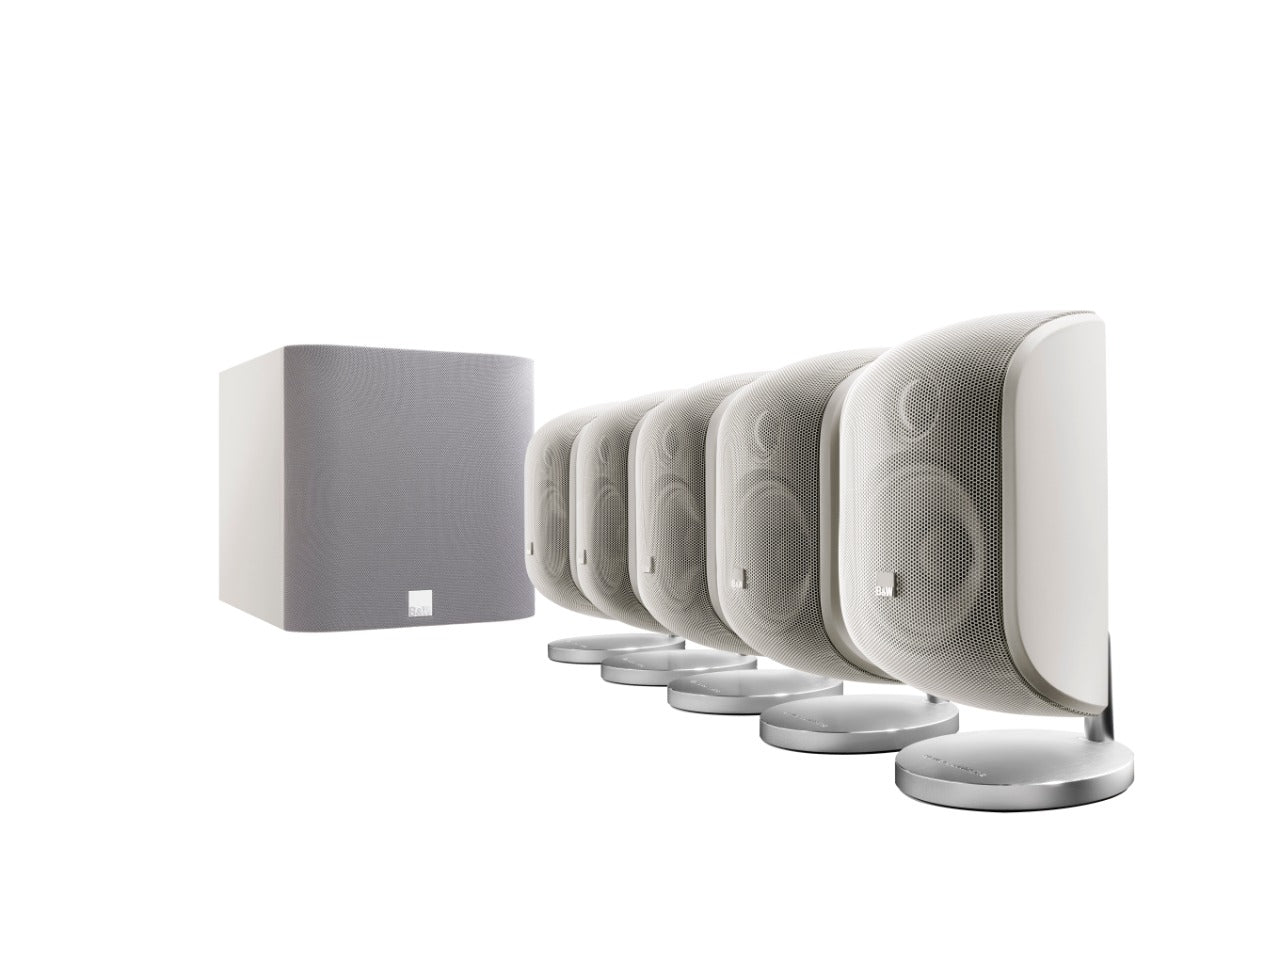 Bowers & Wilkins MT-50 Home theatre system – Matte White